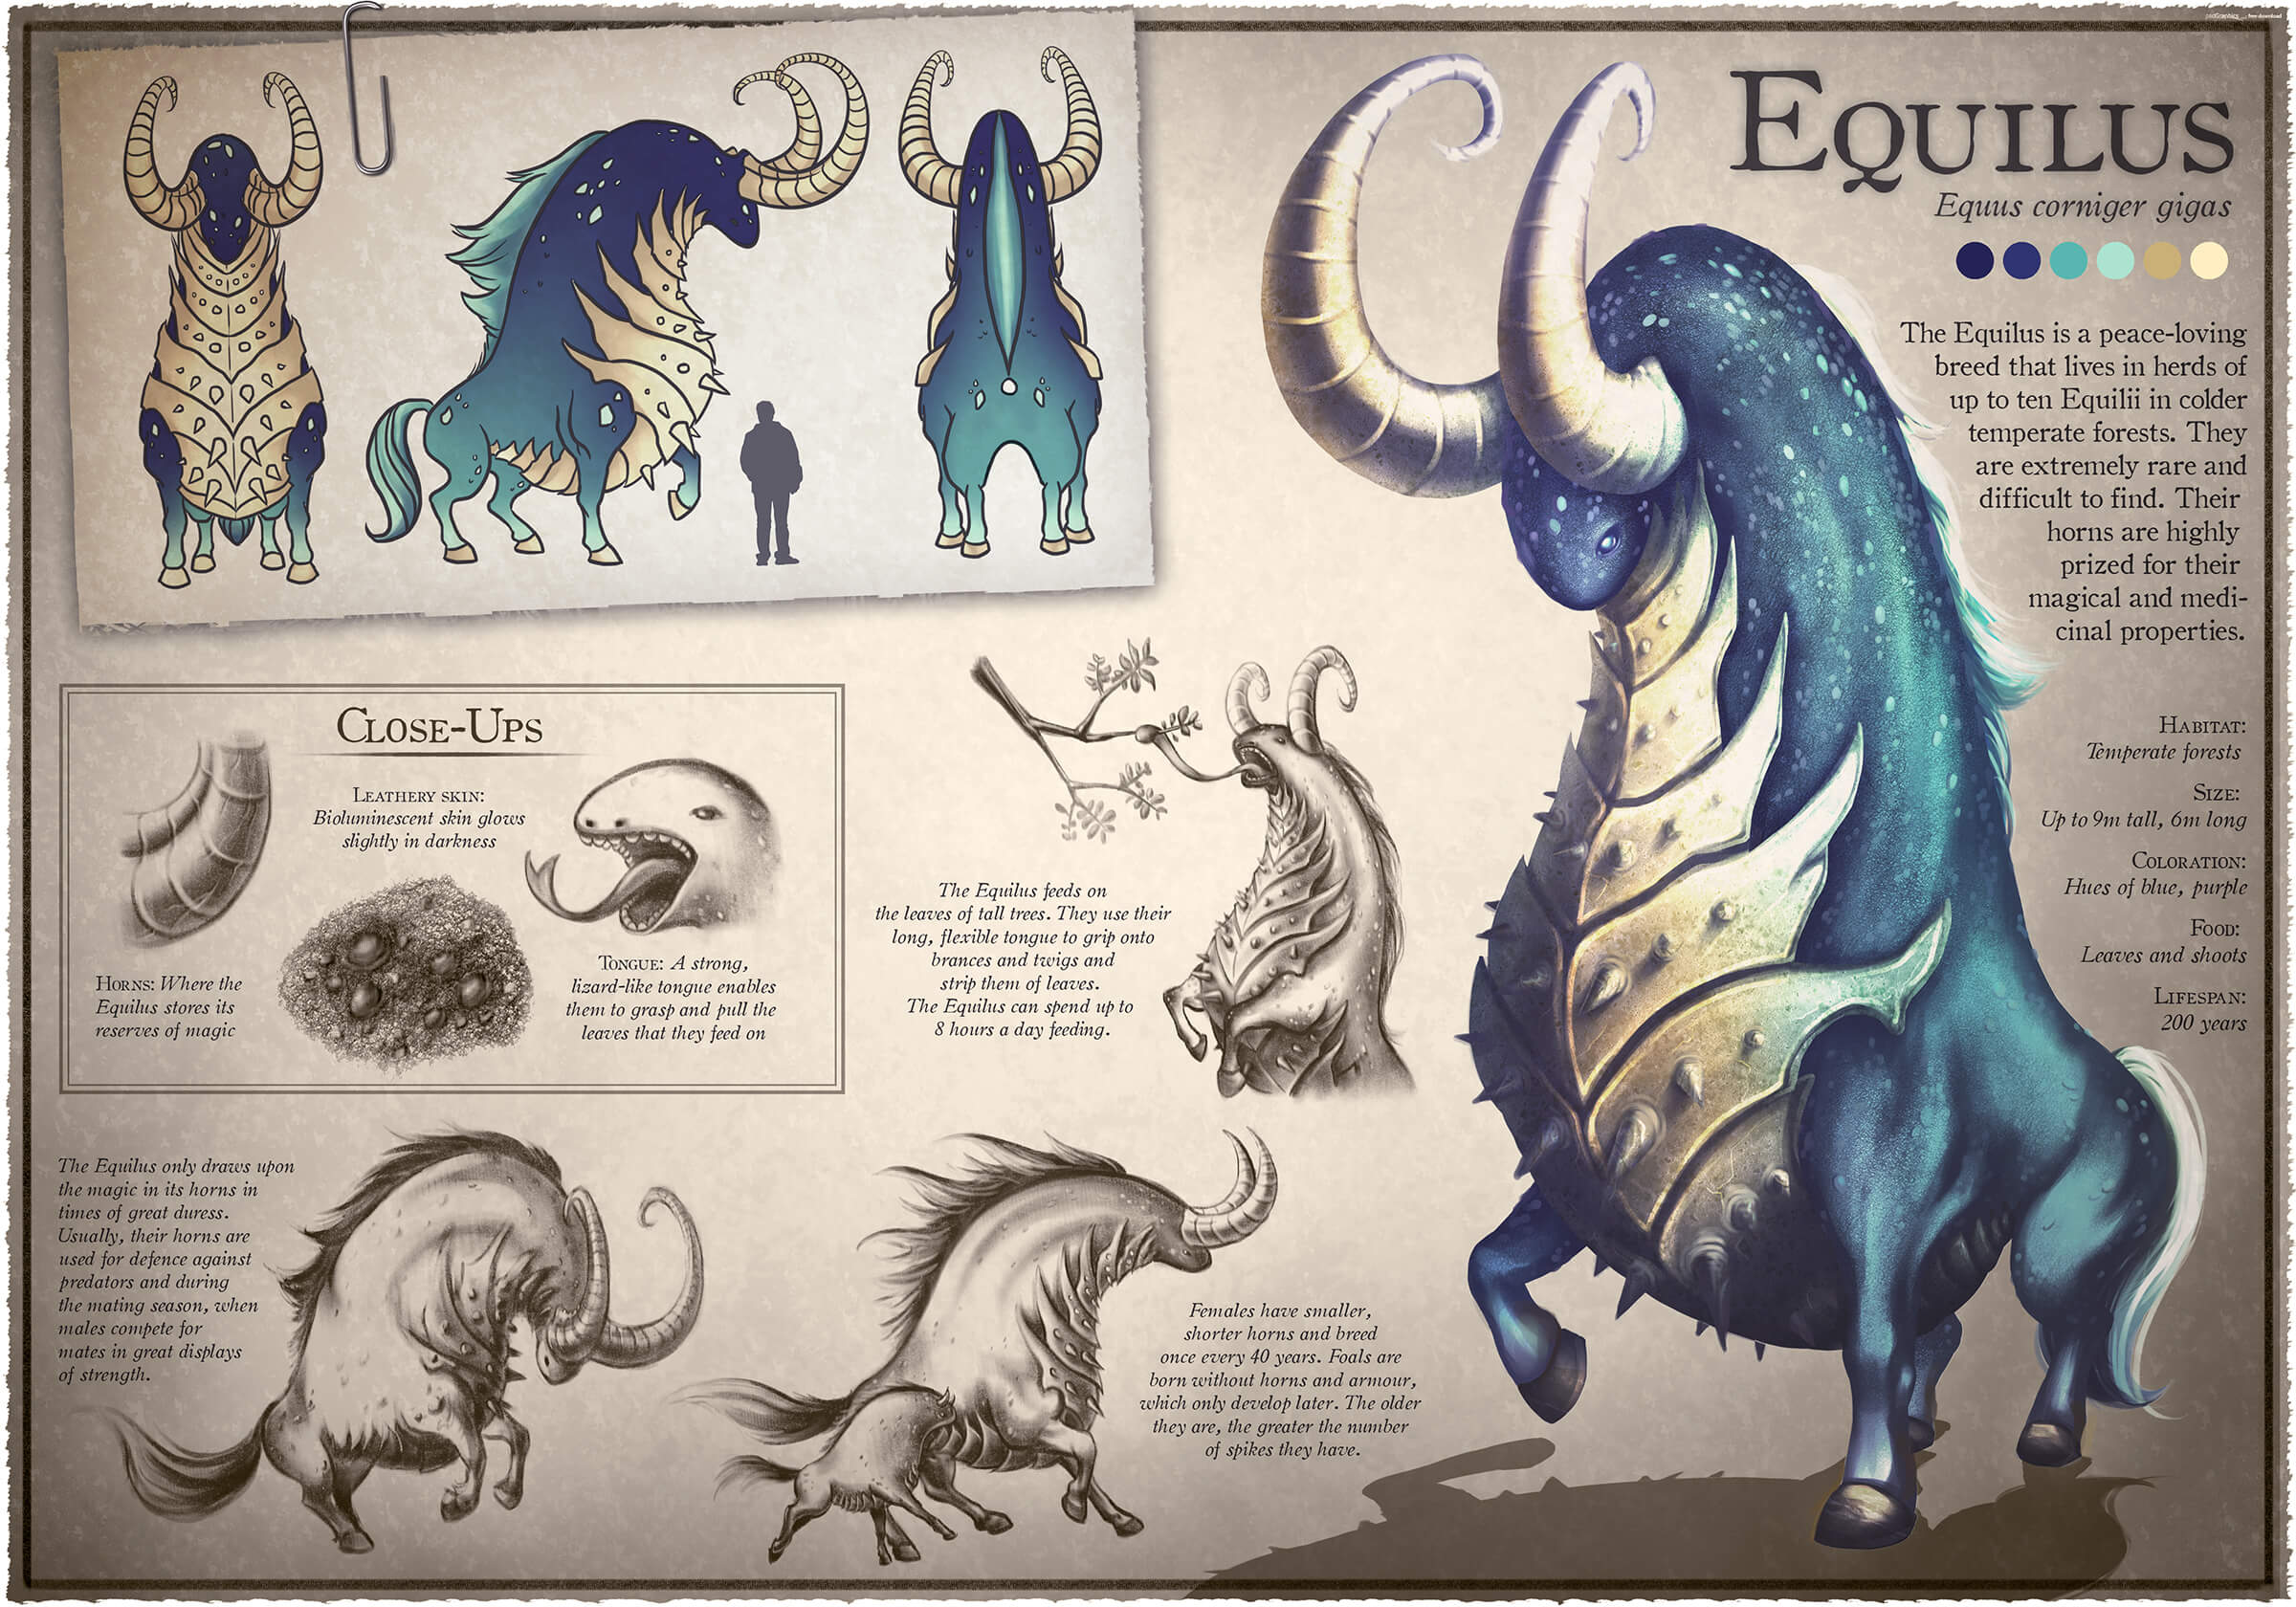 Concept art of a blue beast with the torso of a horse, the horns of a ram, and the head and chest of a dragon-like creature.